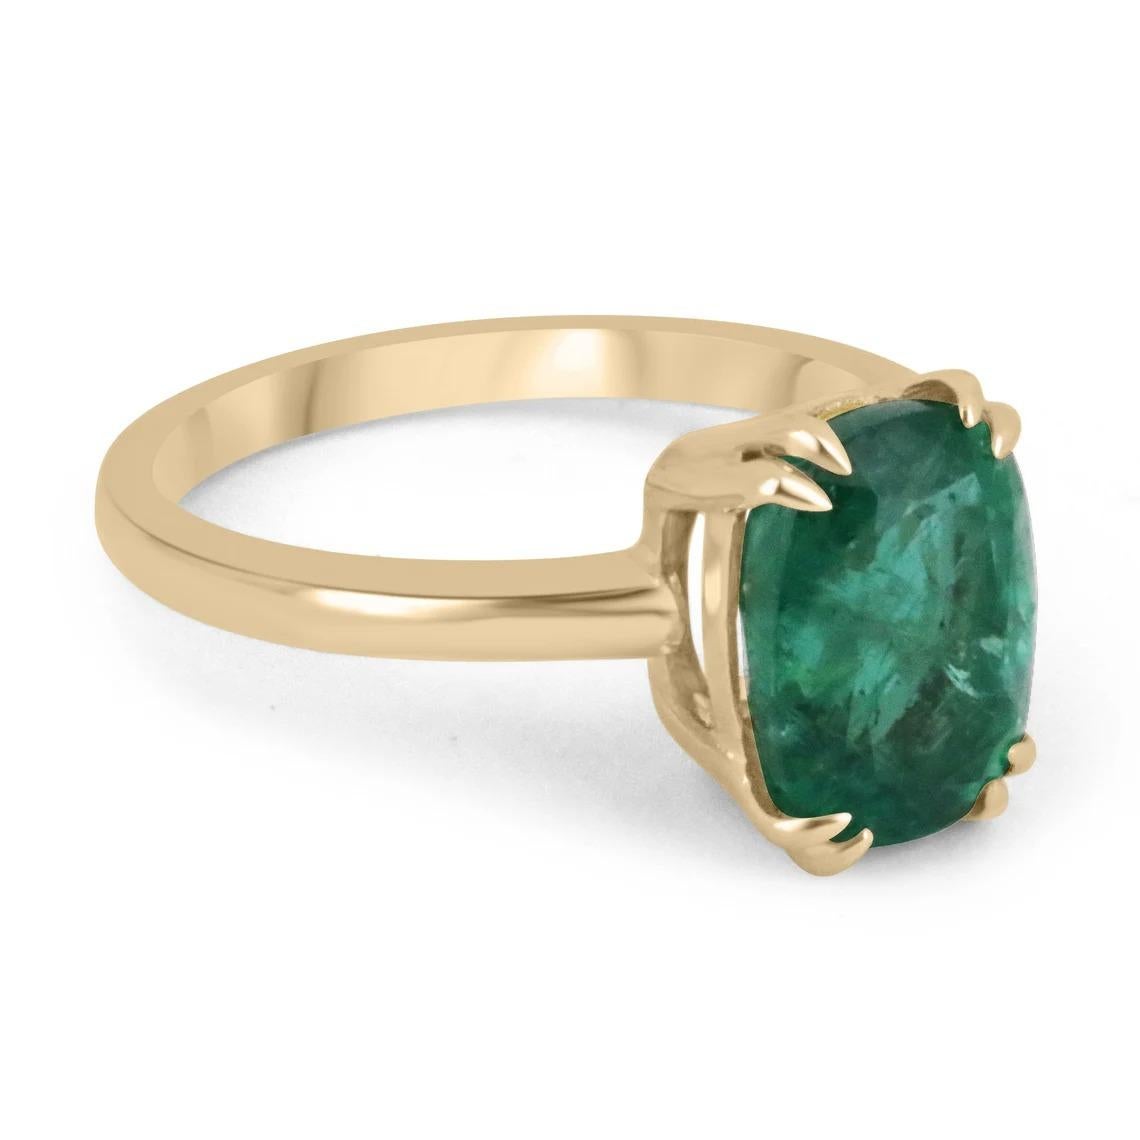 A stunning solitaire emerald ring. This gorgeous piece showcases a ravishing 3.12-carat, natural, fine-quality Zambian emerald. The gemstone displays an enthralling deep, lustrous, emerald green color with remarkable qualities. Securely double claw